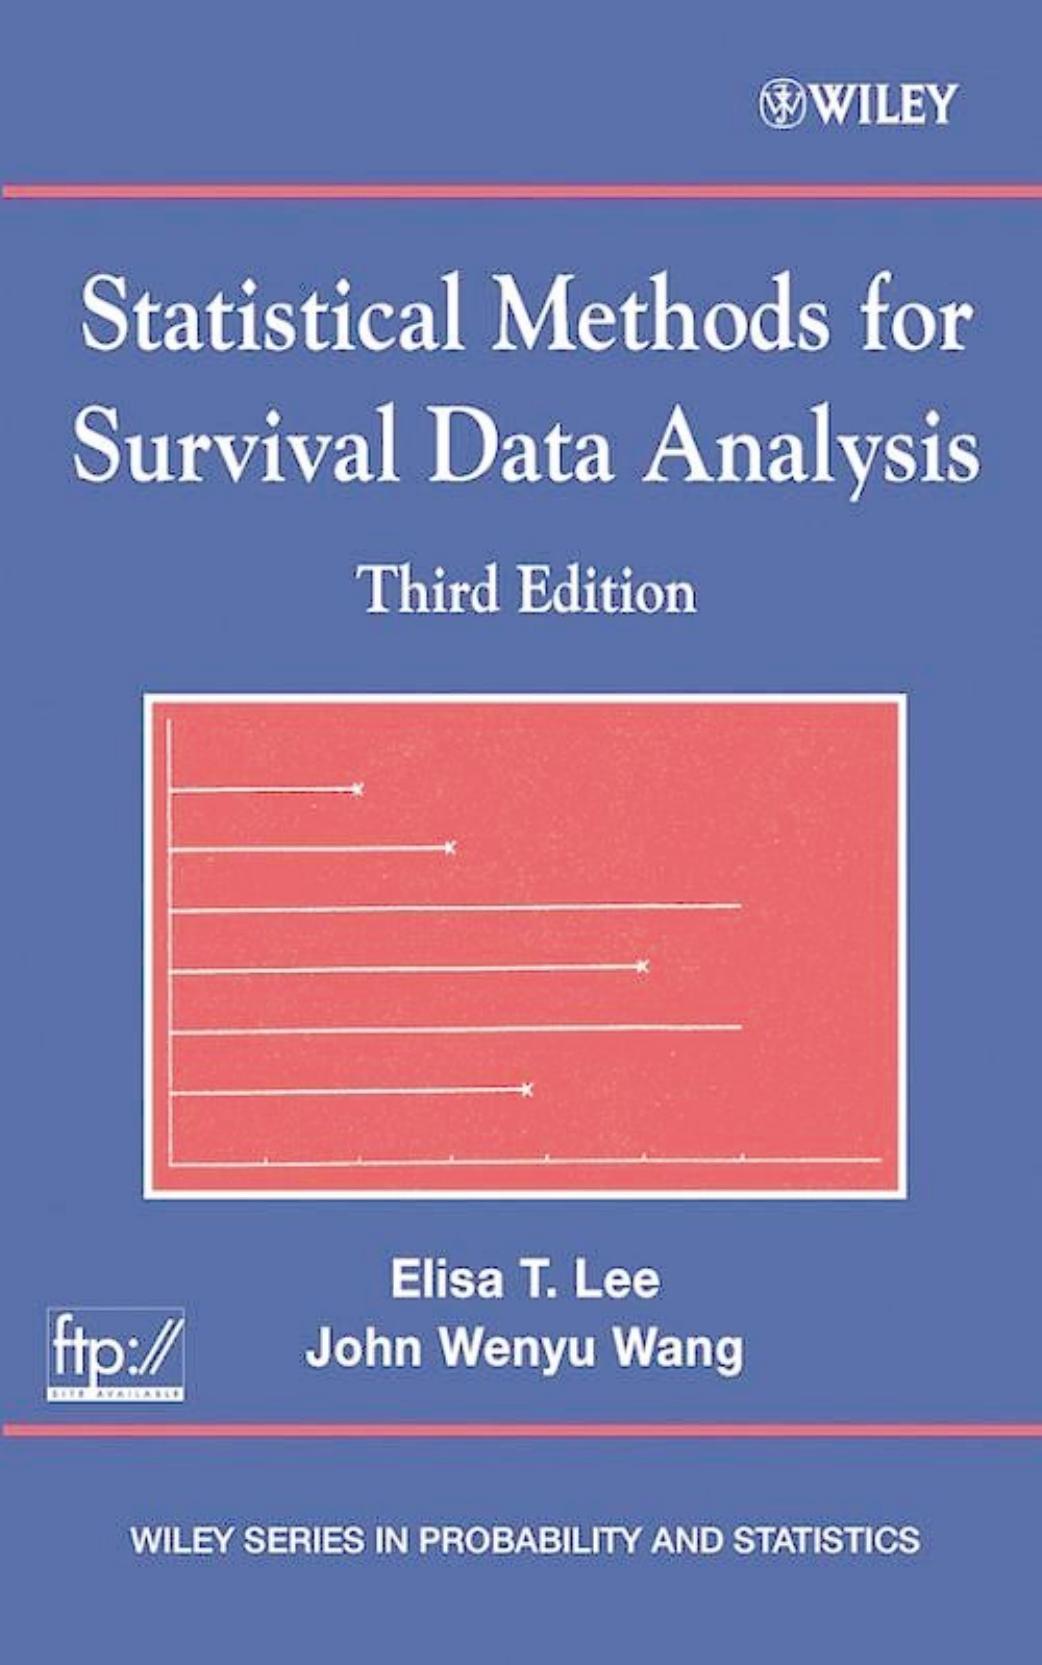 Statistical Methods for Survival Data Analysis(3rdEd)